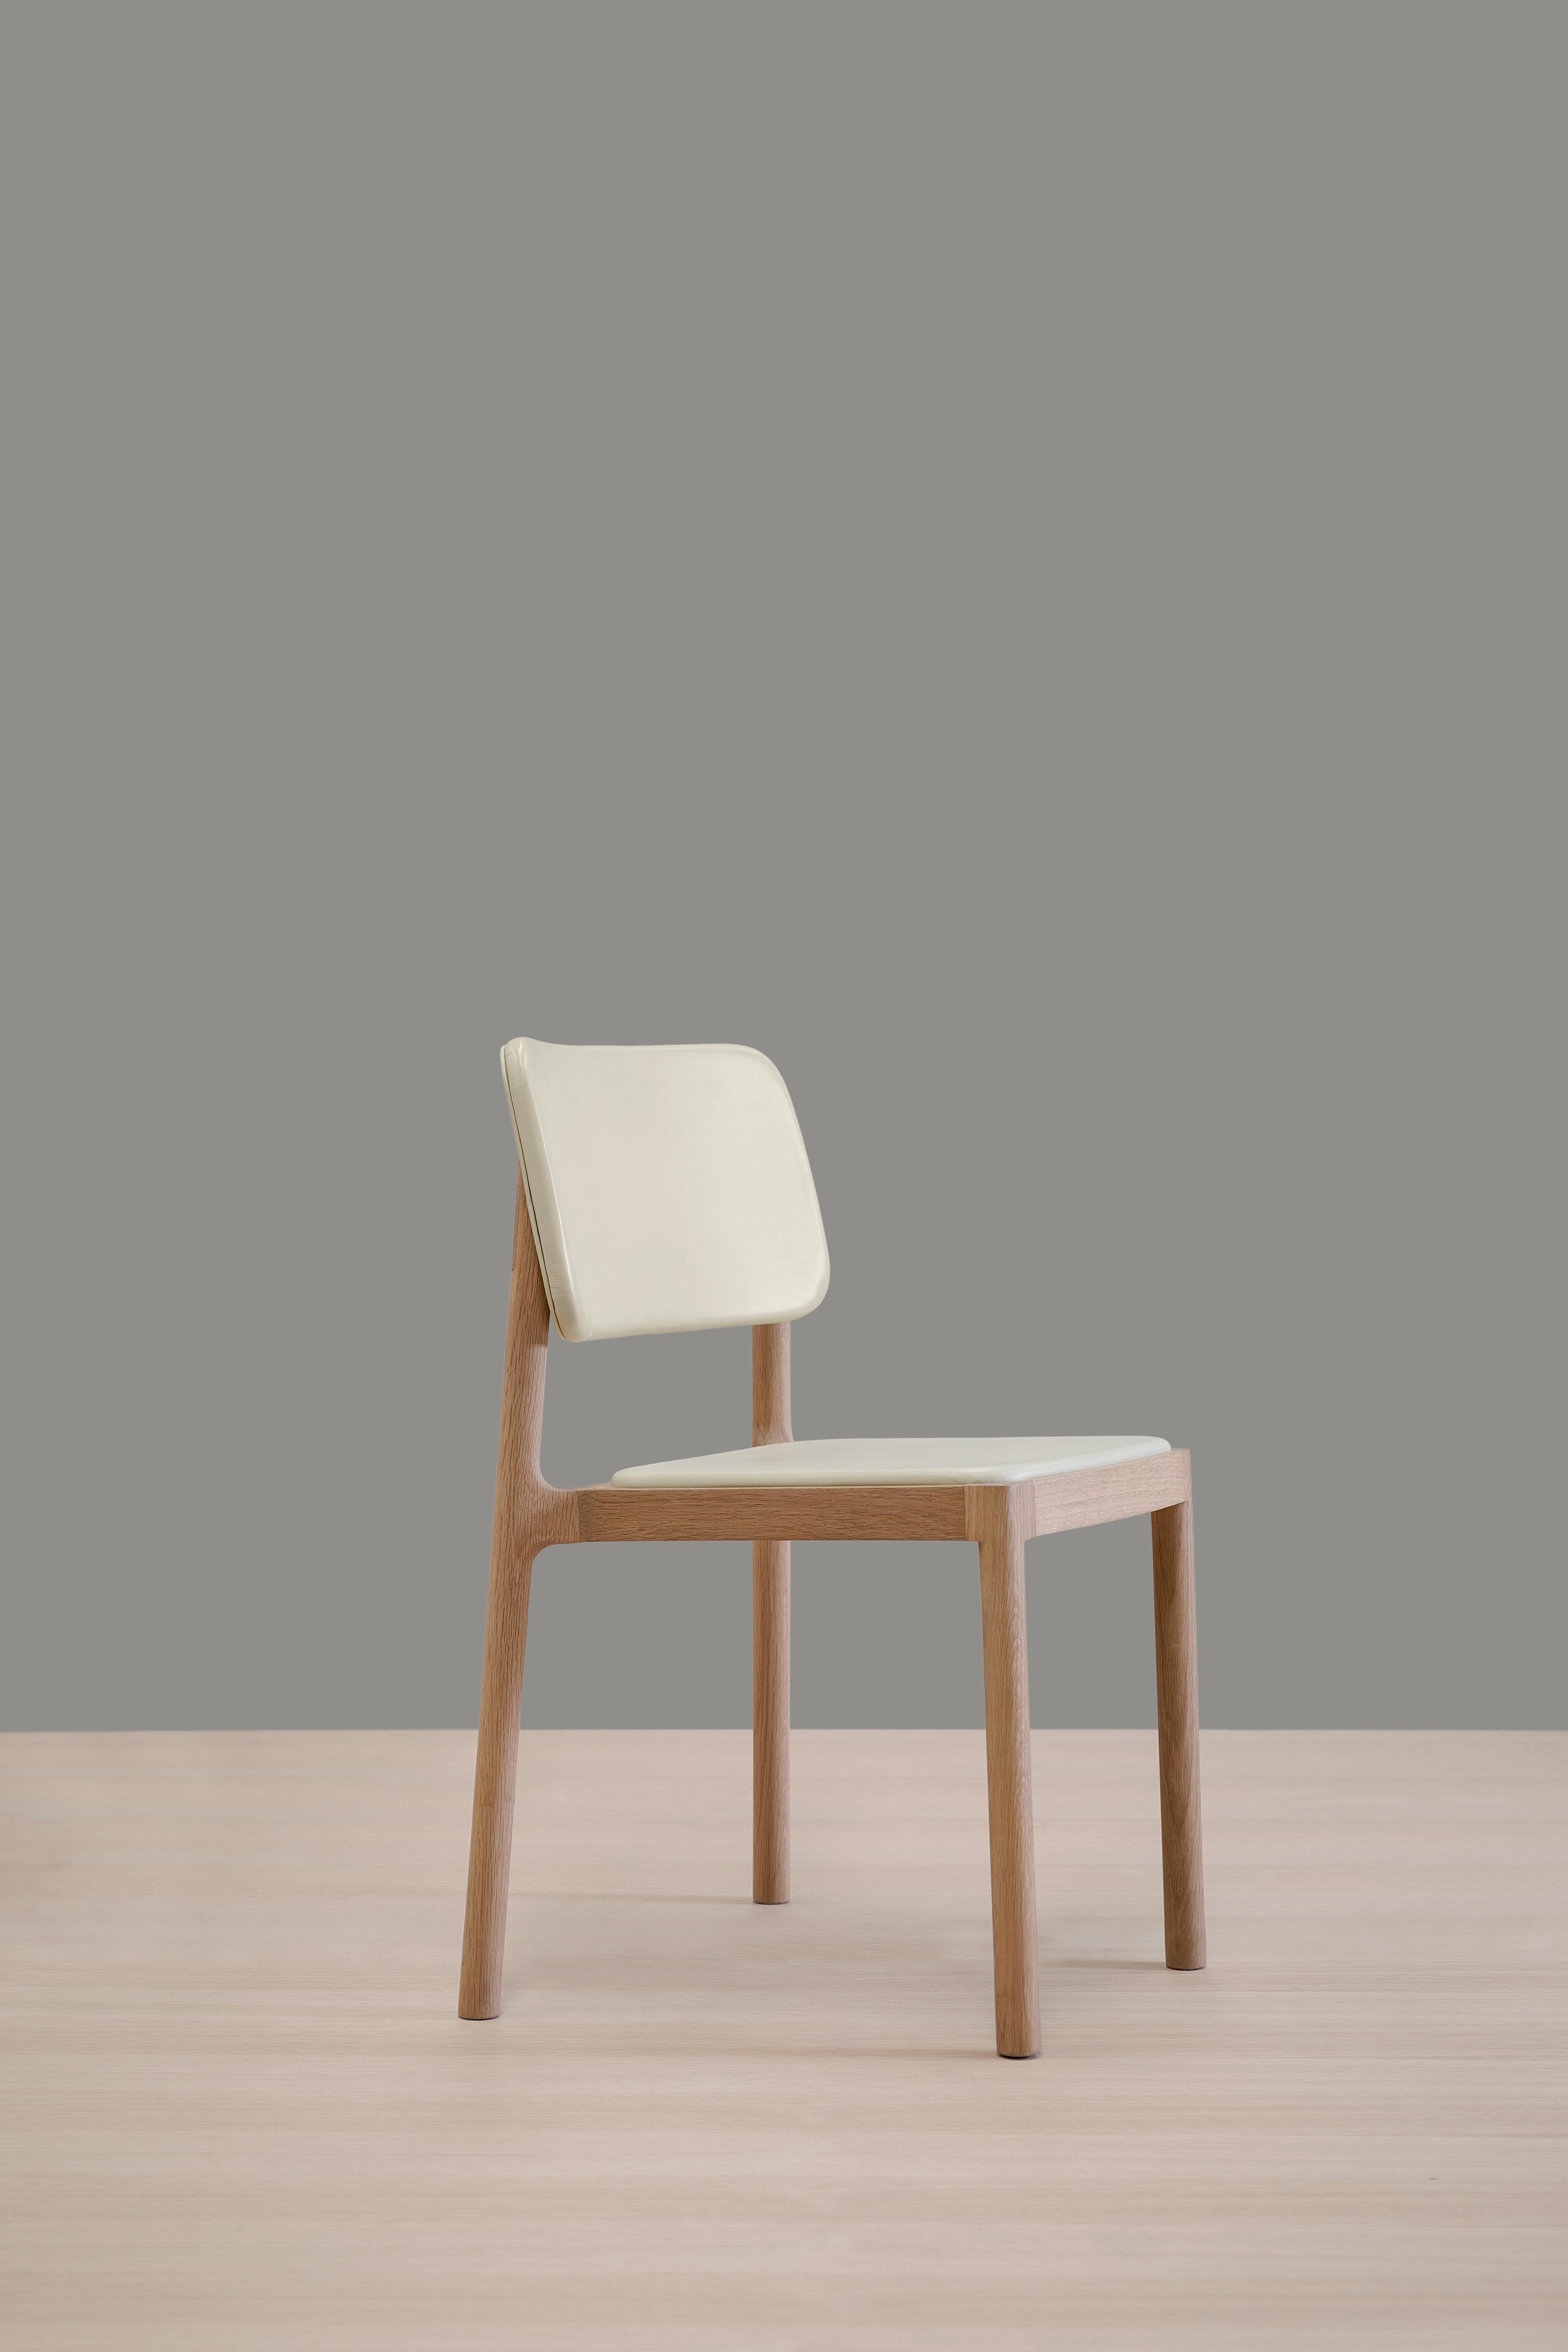 Linard dining chair by Thai Hua
Dimensions: D 57 x W 48 x H 81 cm
Materials: oak wood, leather.

Dining chair made of solid holm white oak and leather.

Thai Hua is an industrial designer originally from Vietnam trained in Switzerland. Since